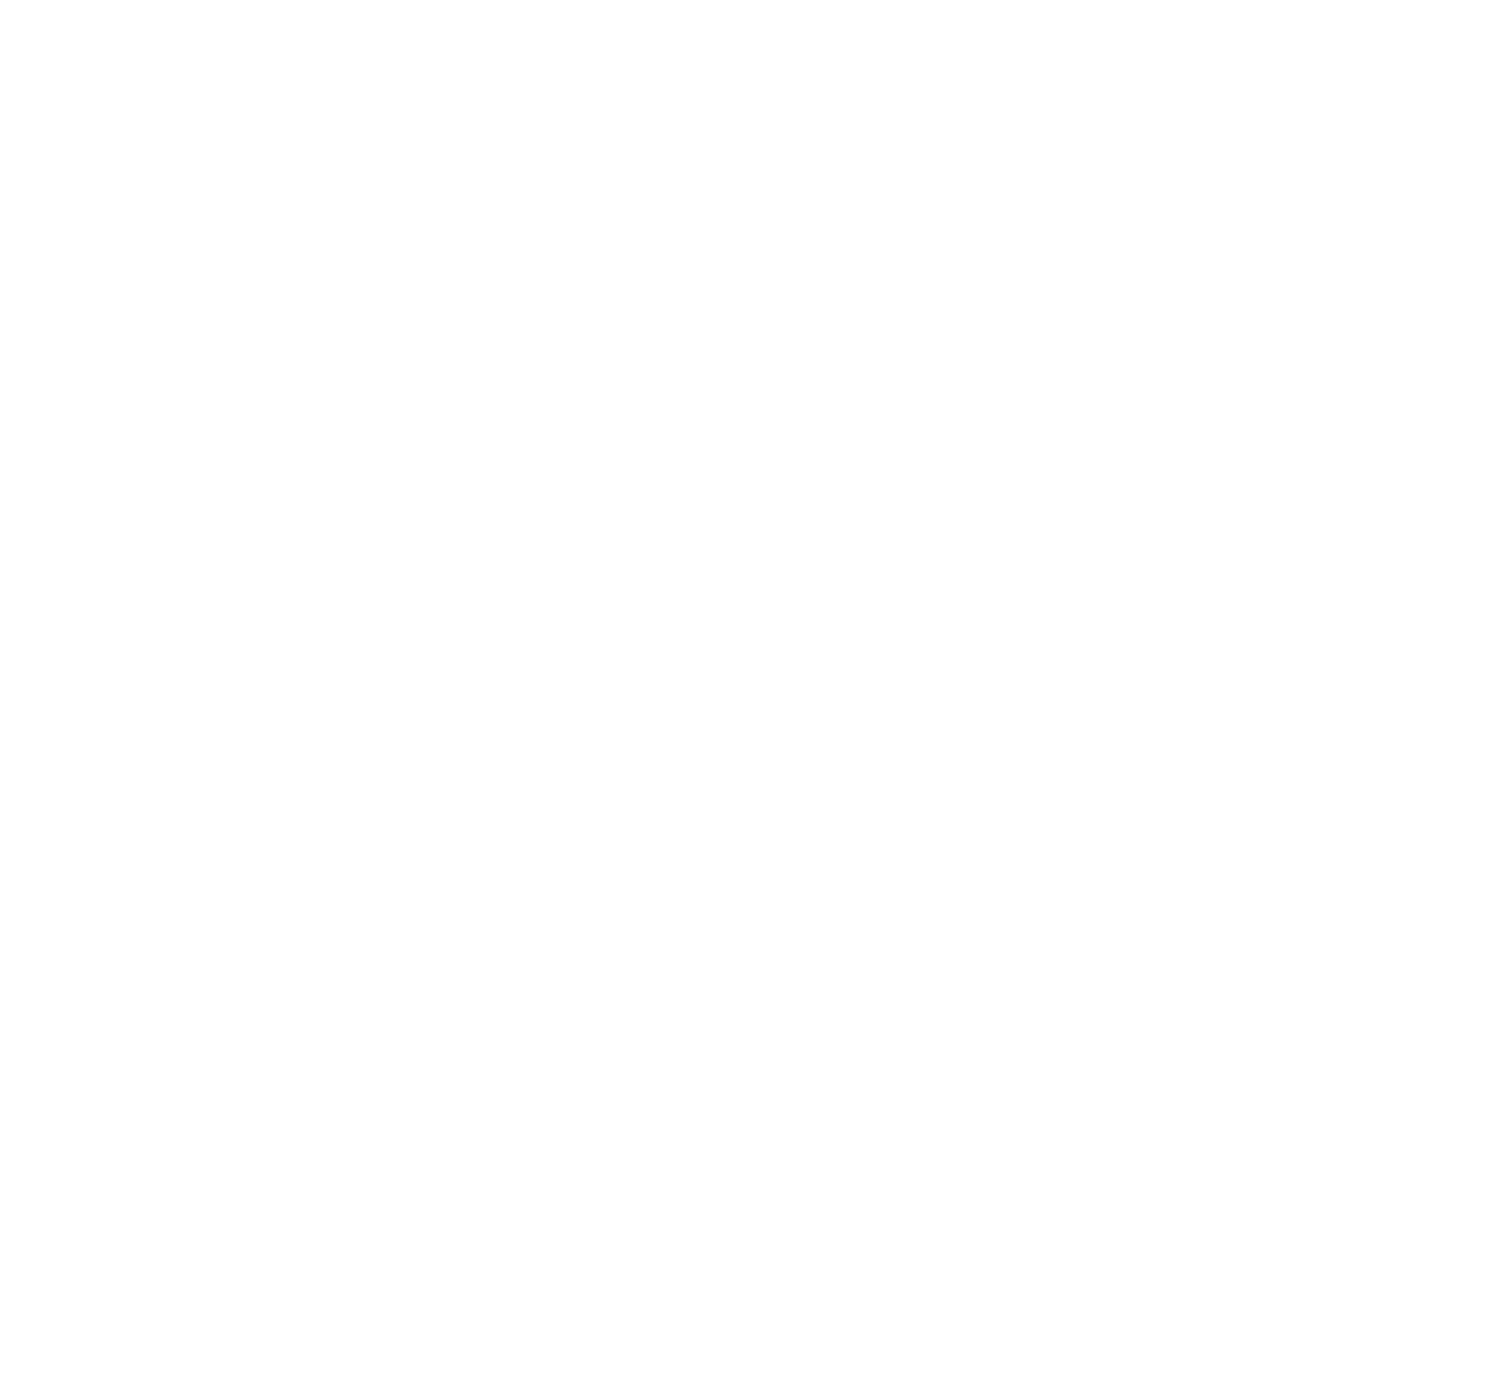 100 Years of Capel Rugs